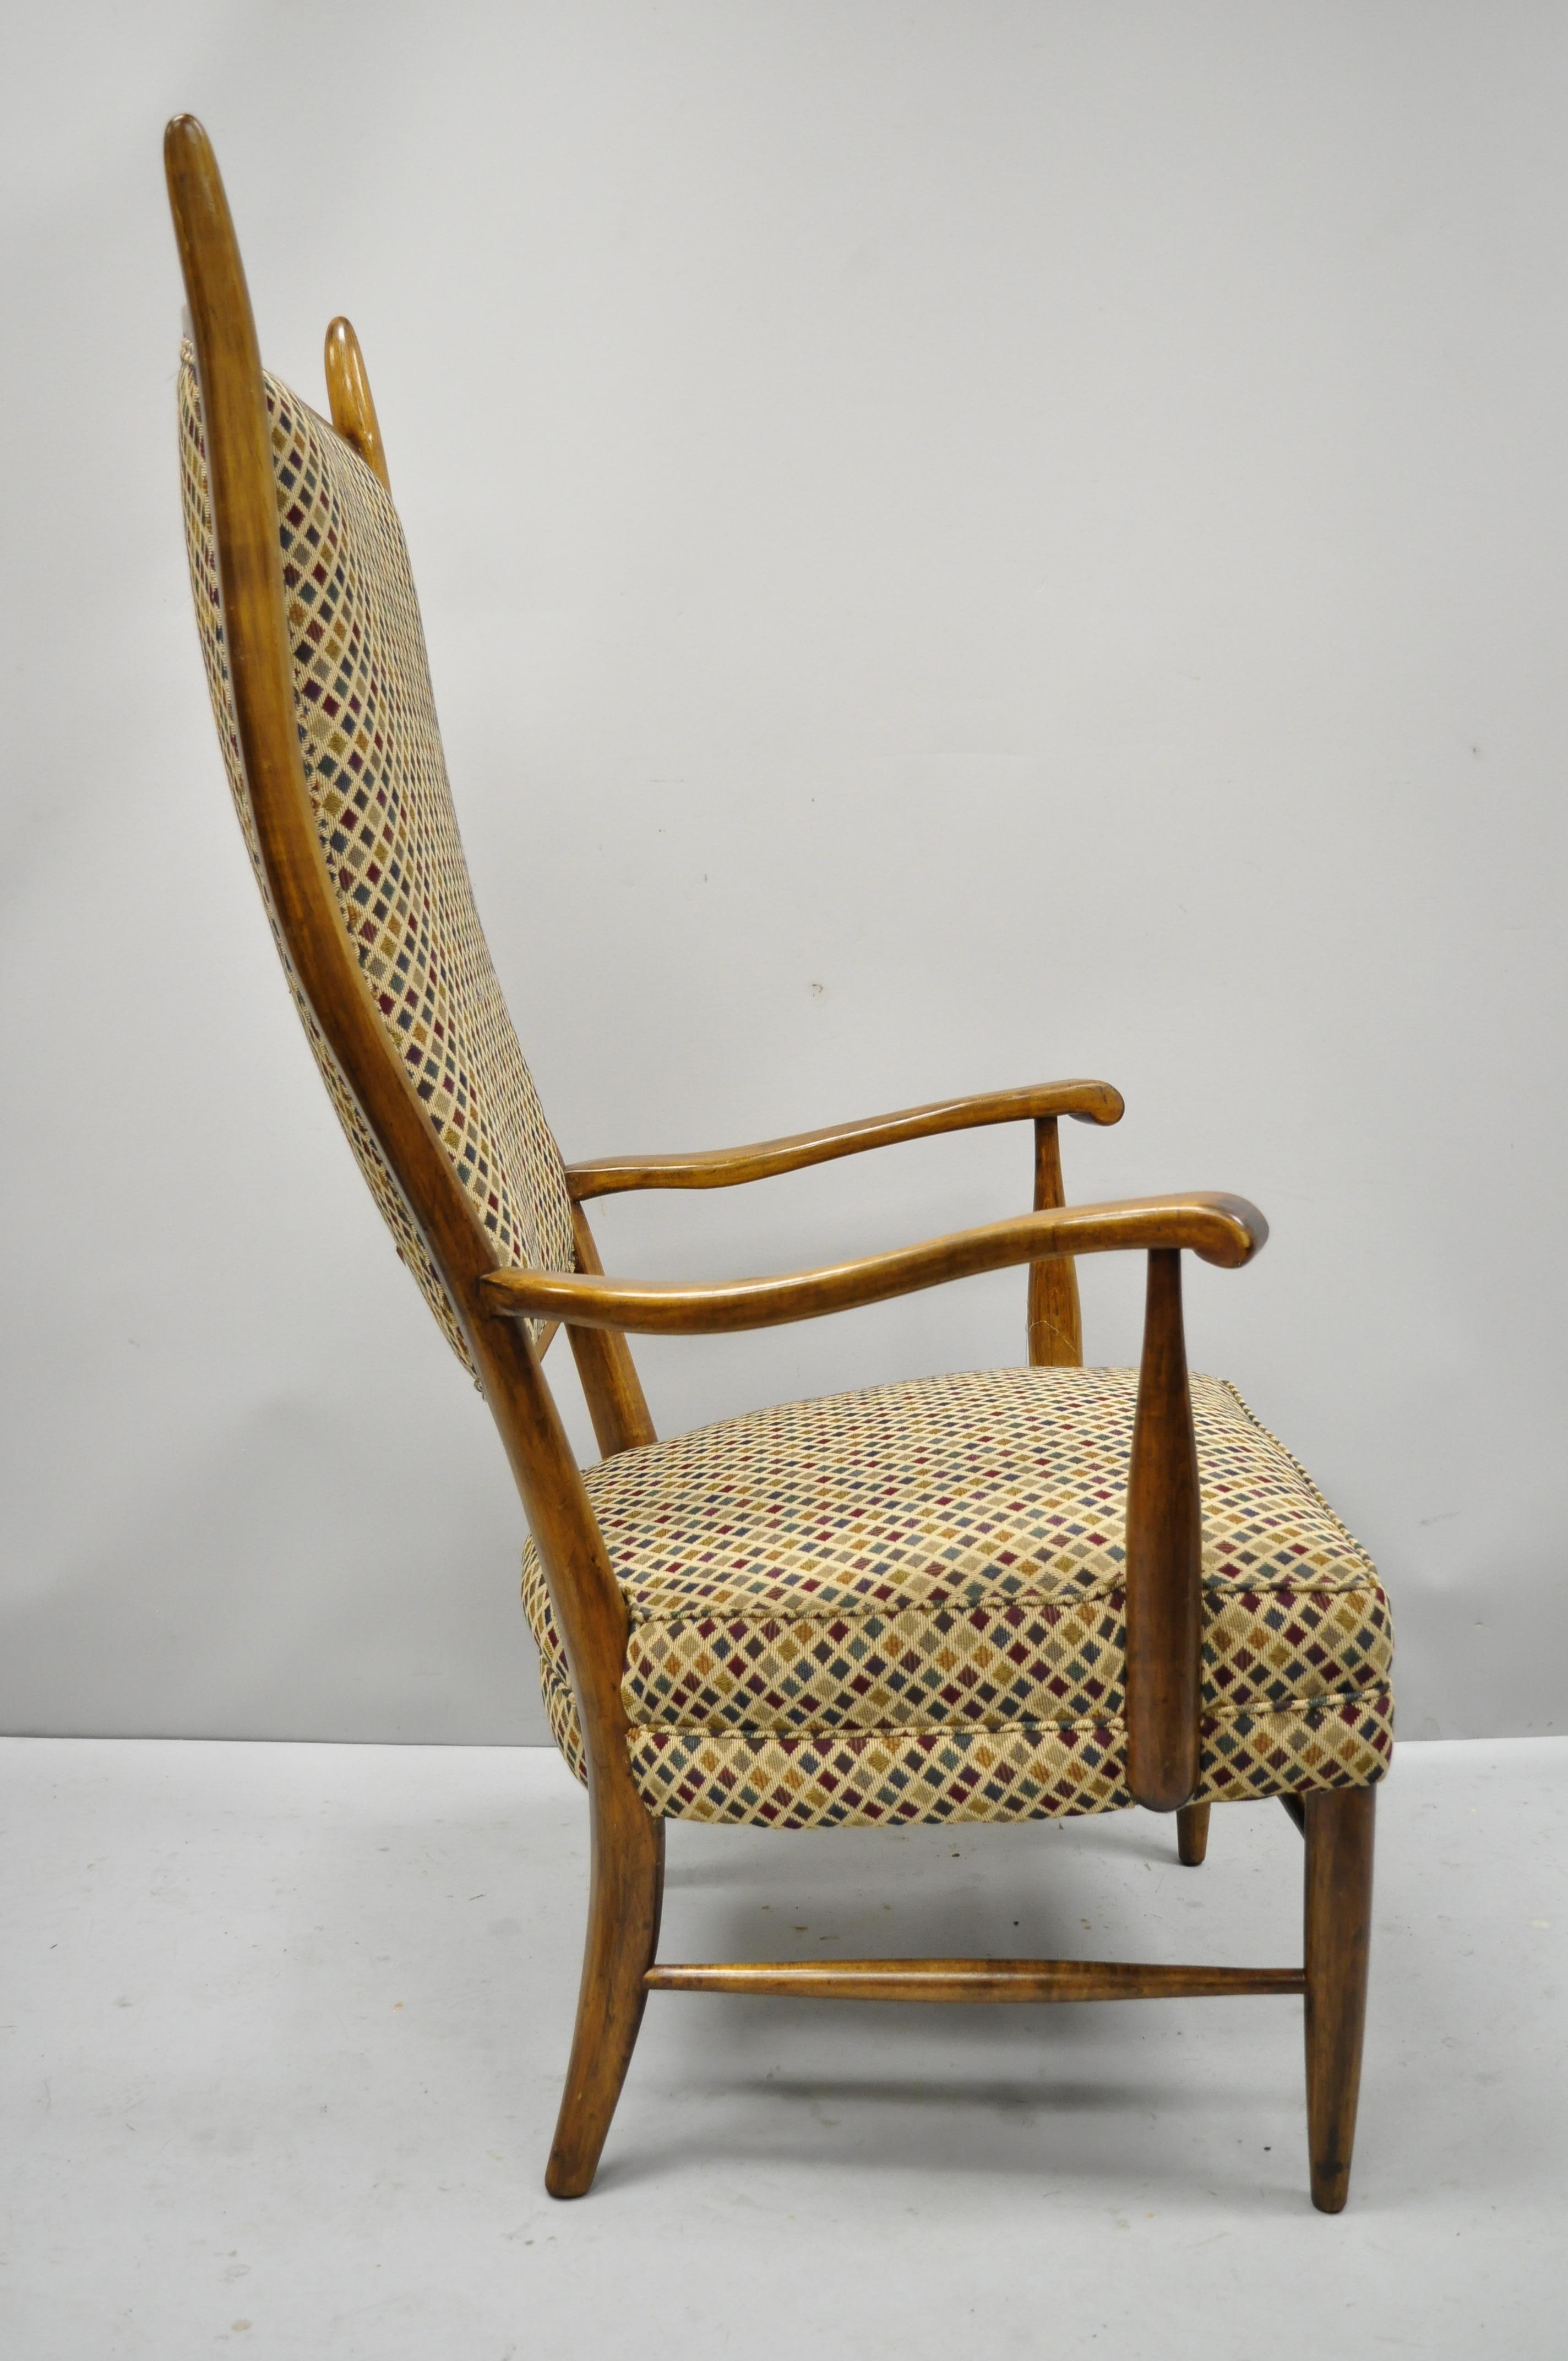 Vintage Mid-Century Modern High Back Maple Armchair Attribute to Edward Wormley For Sale 1